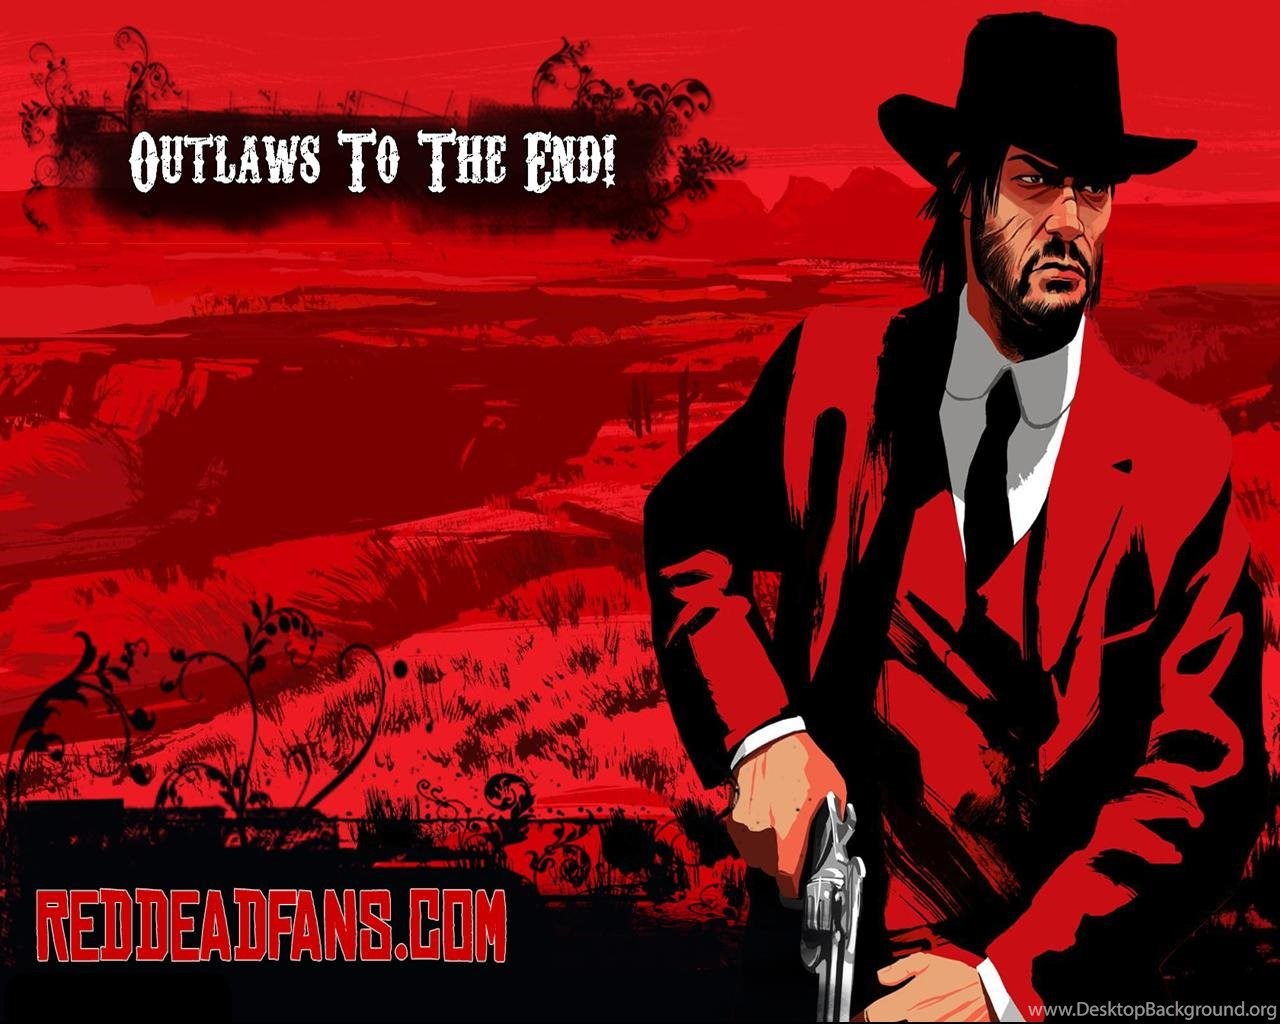 Wallpapers Red Dead Redemption Games Image Desktop Background Images, Photos, Reviews